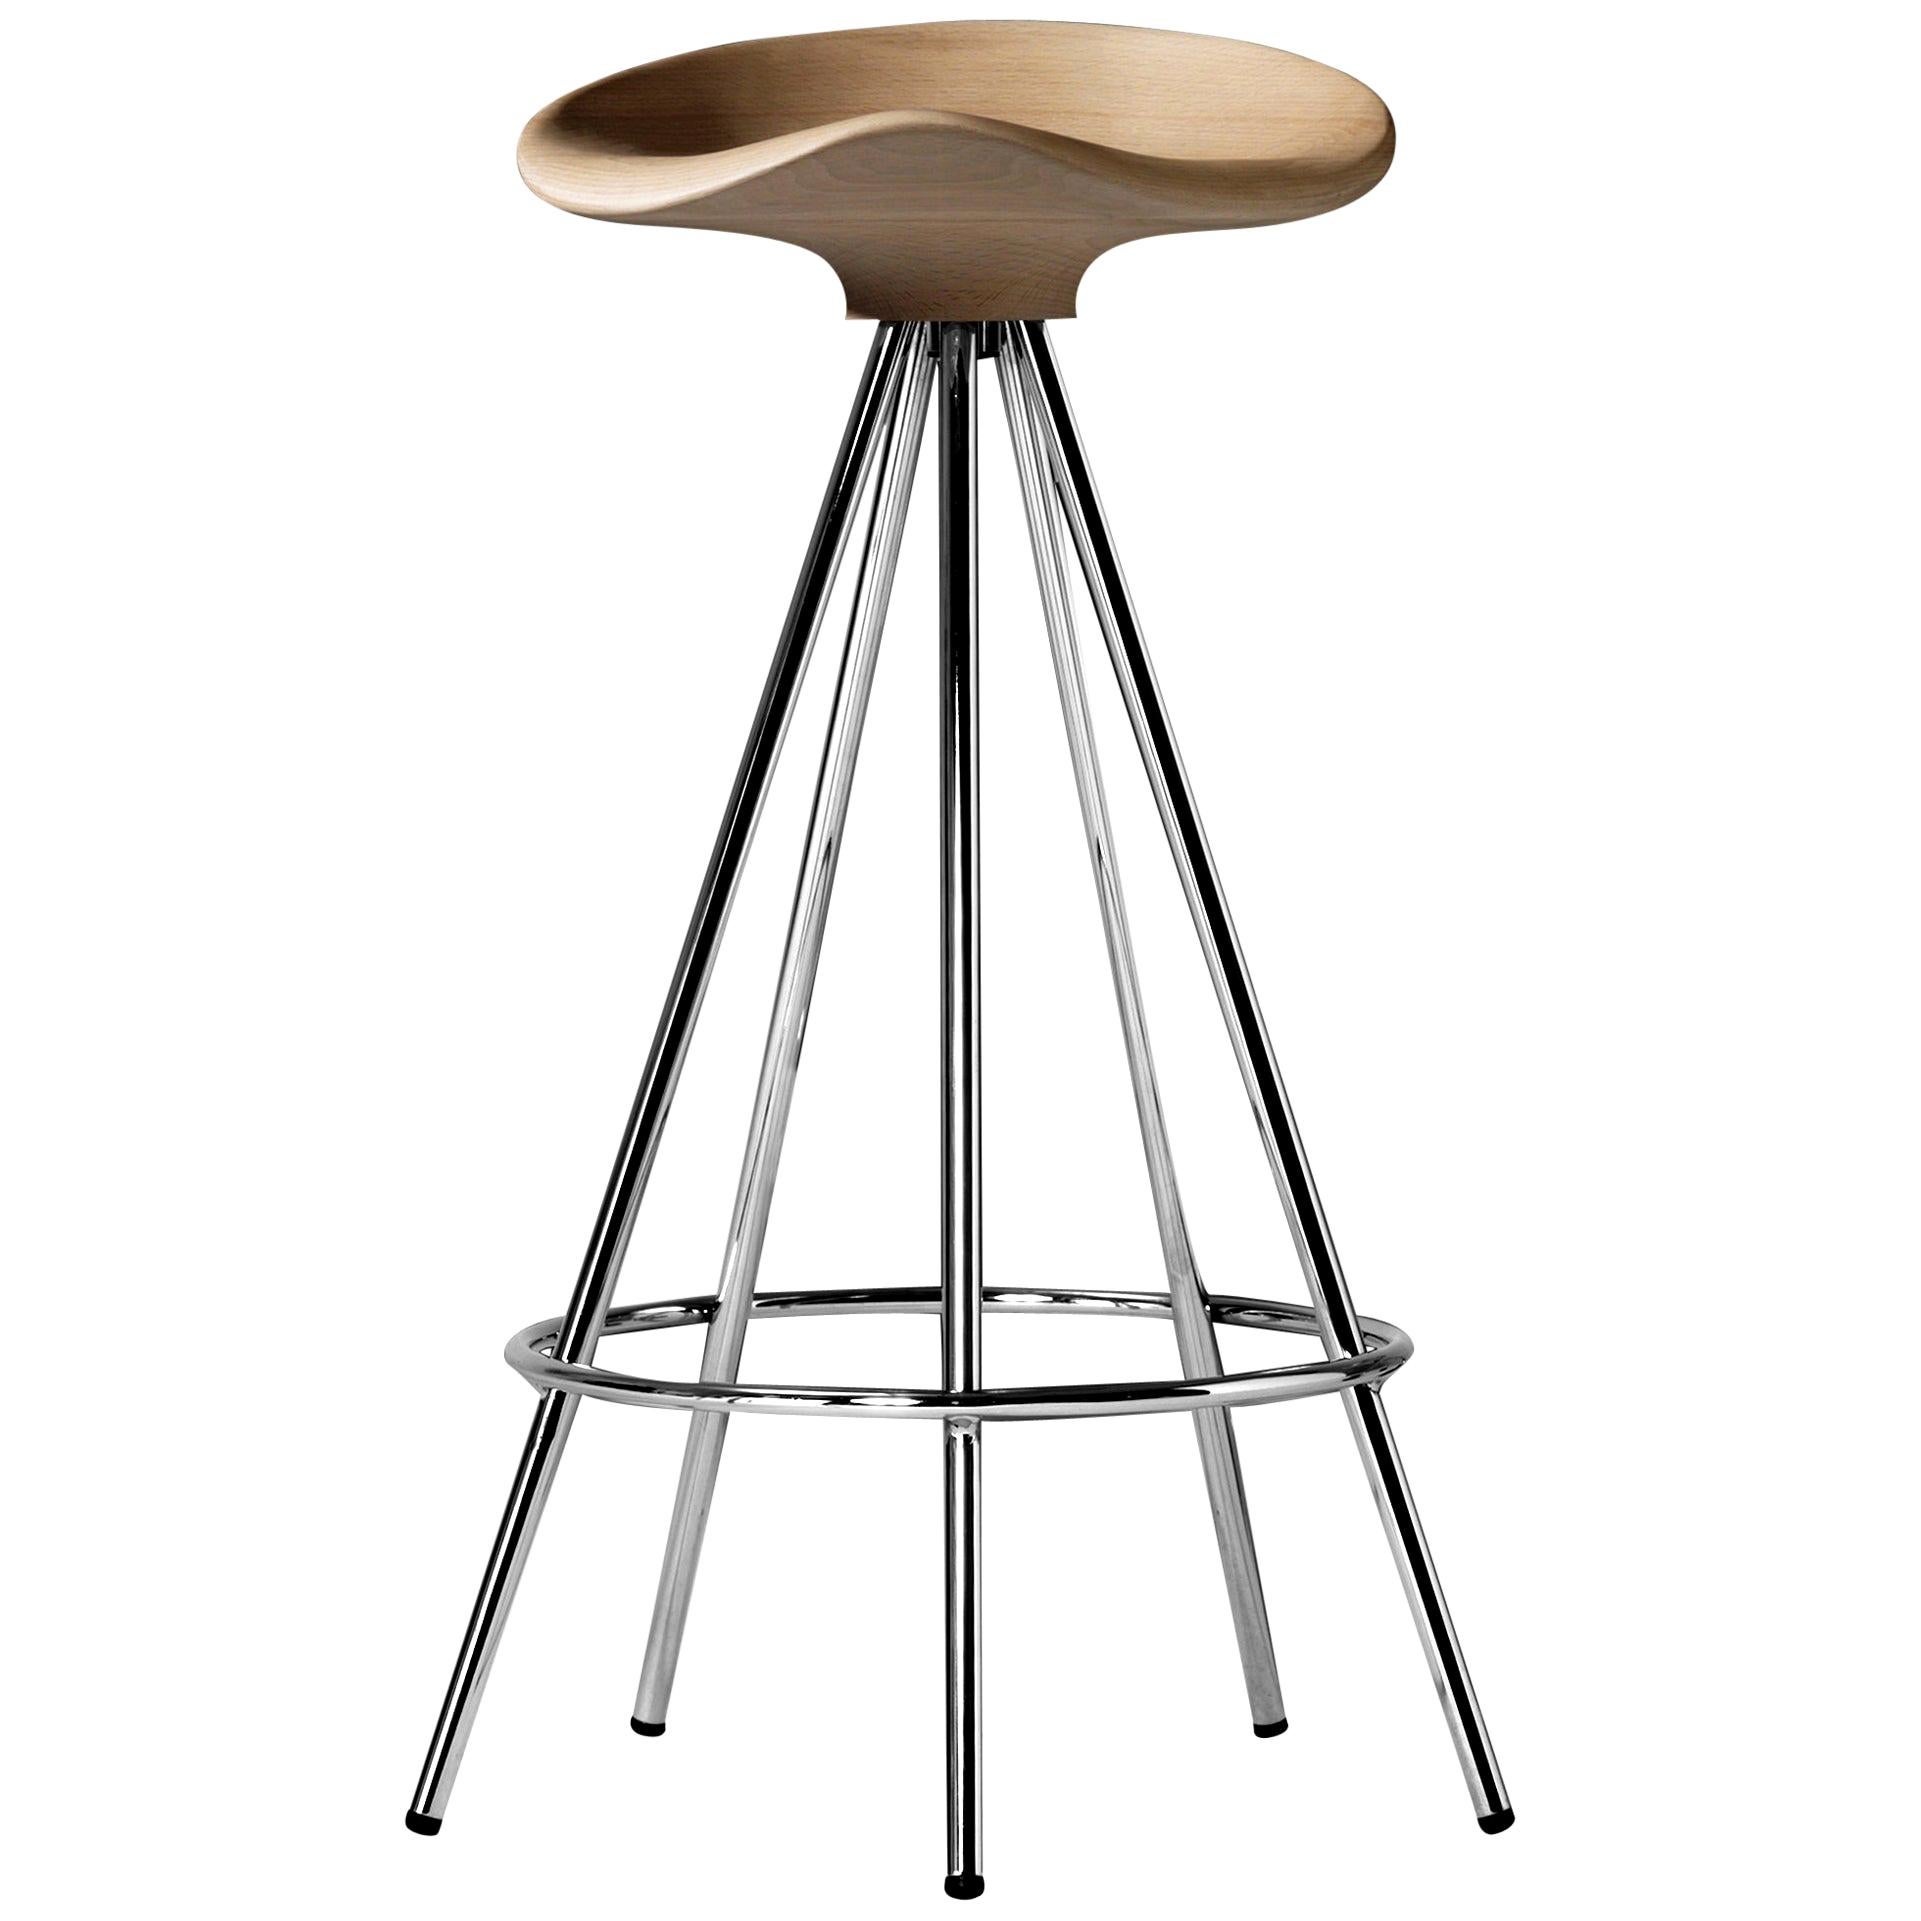 Pepe Cortes Contemporary Jamaica Steel Wood Stool for BD Barcelona ENVIOS